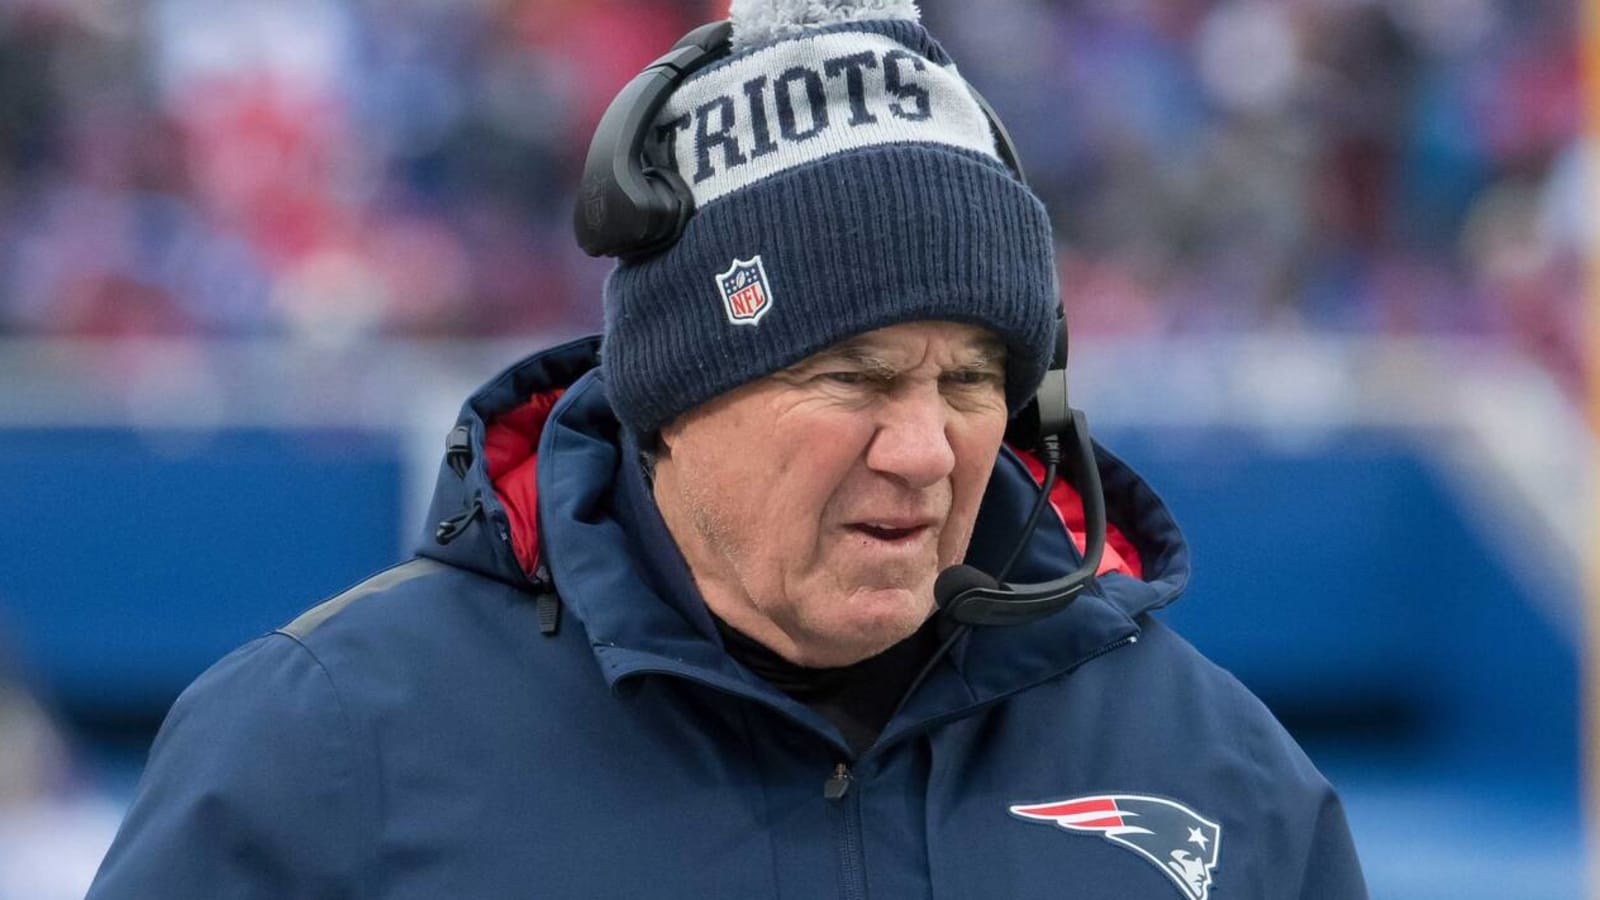 Changes expected for Patriots after Belichick, Kraft meeting